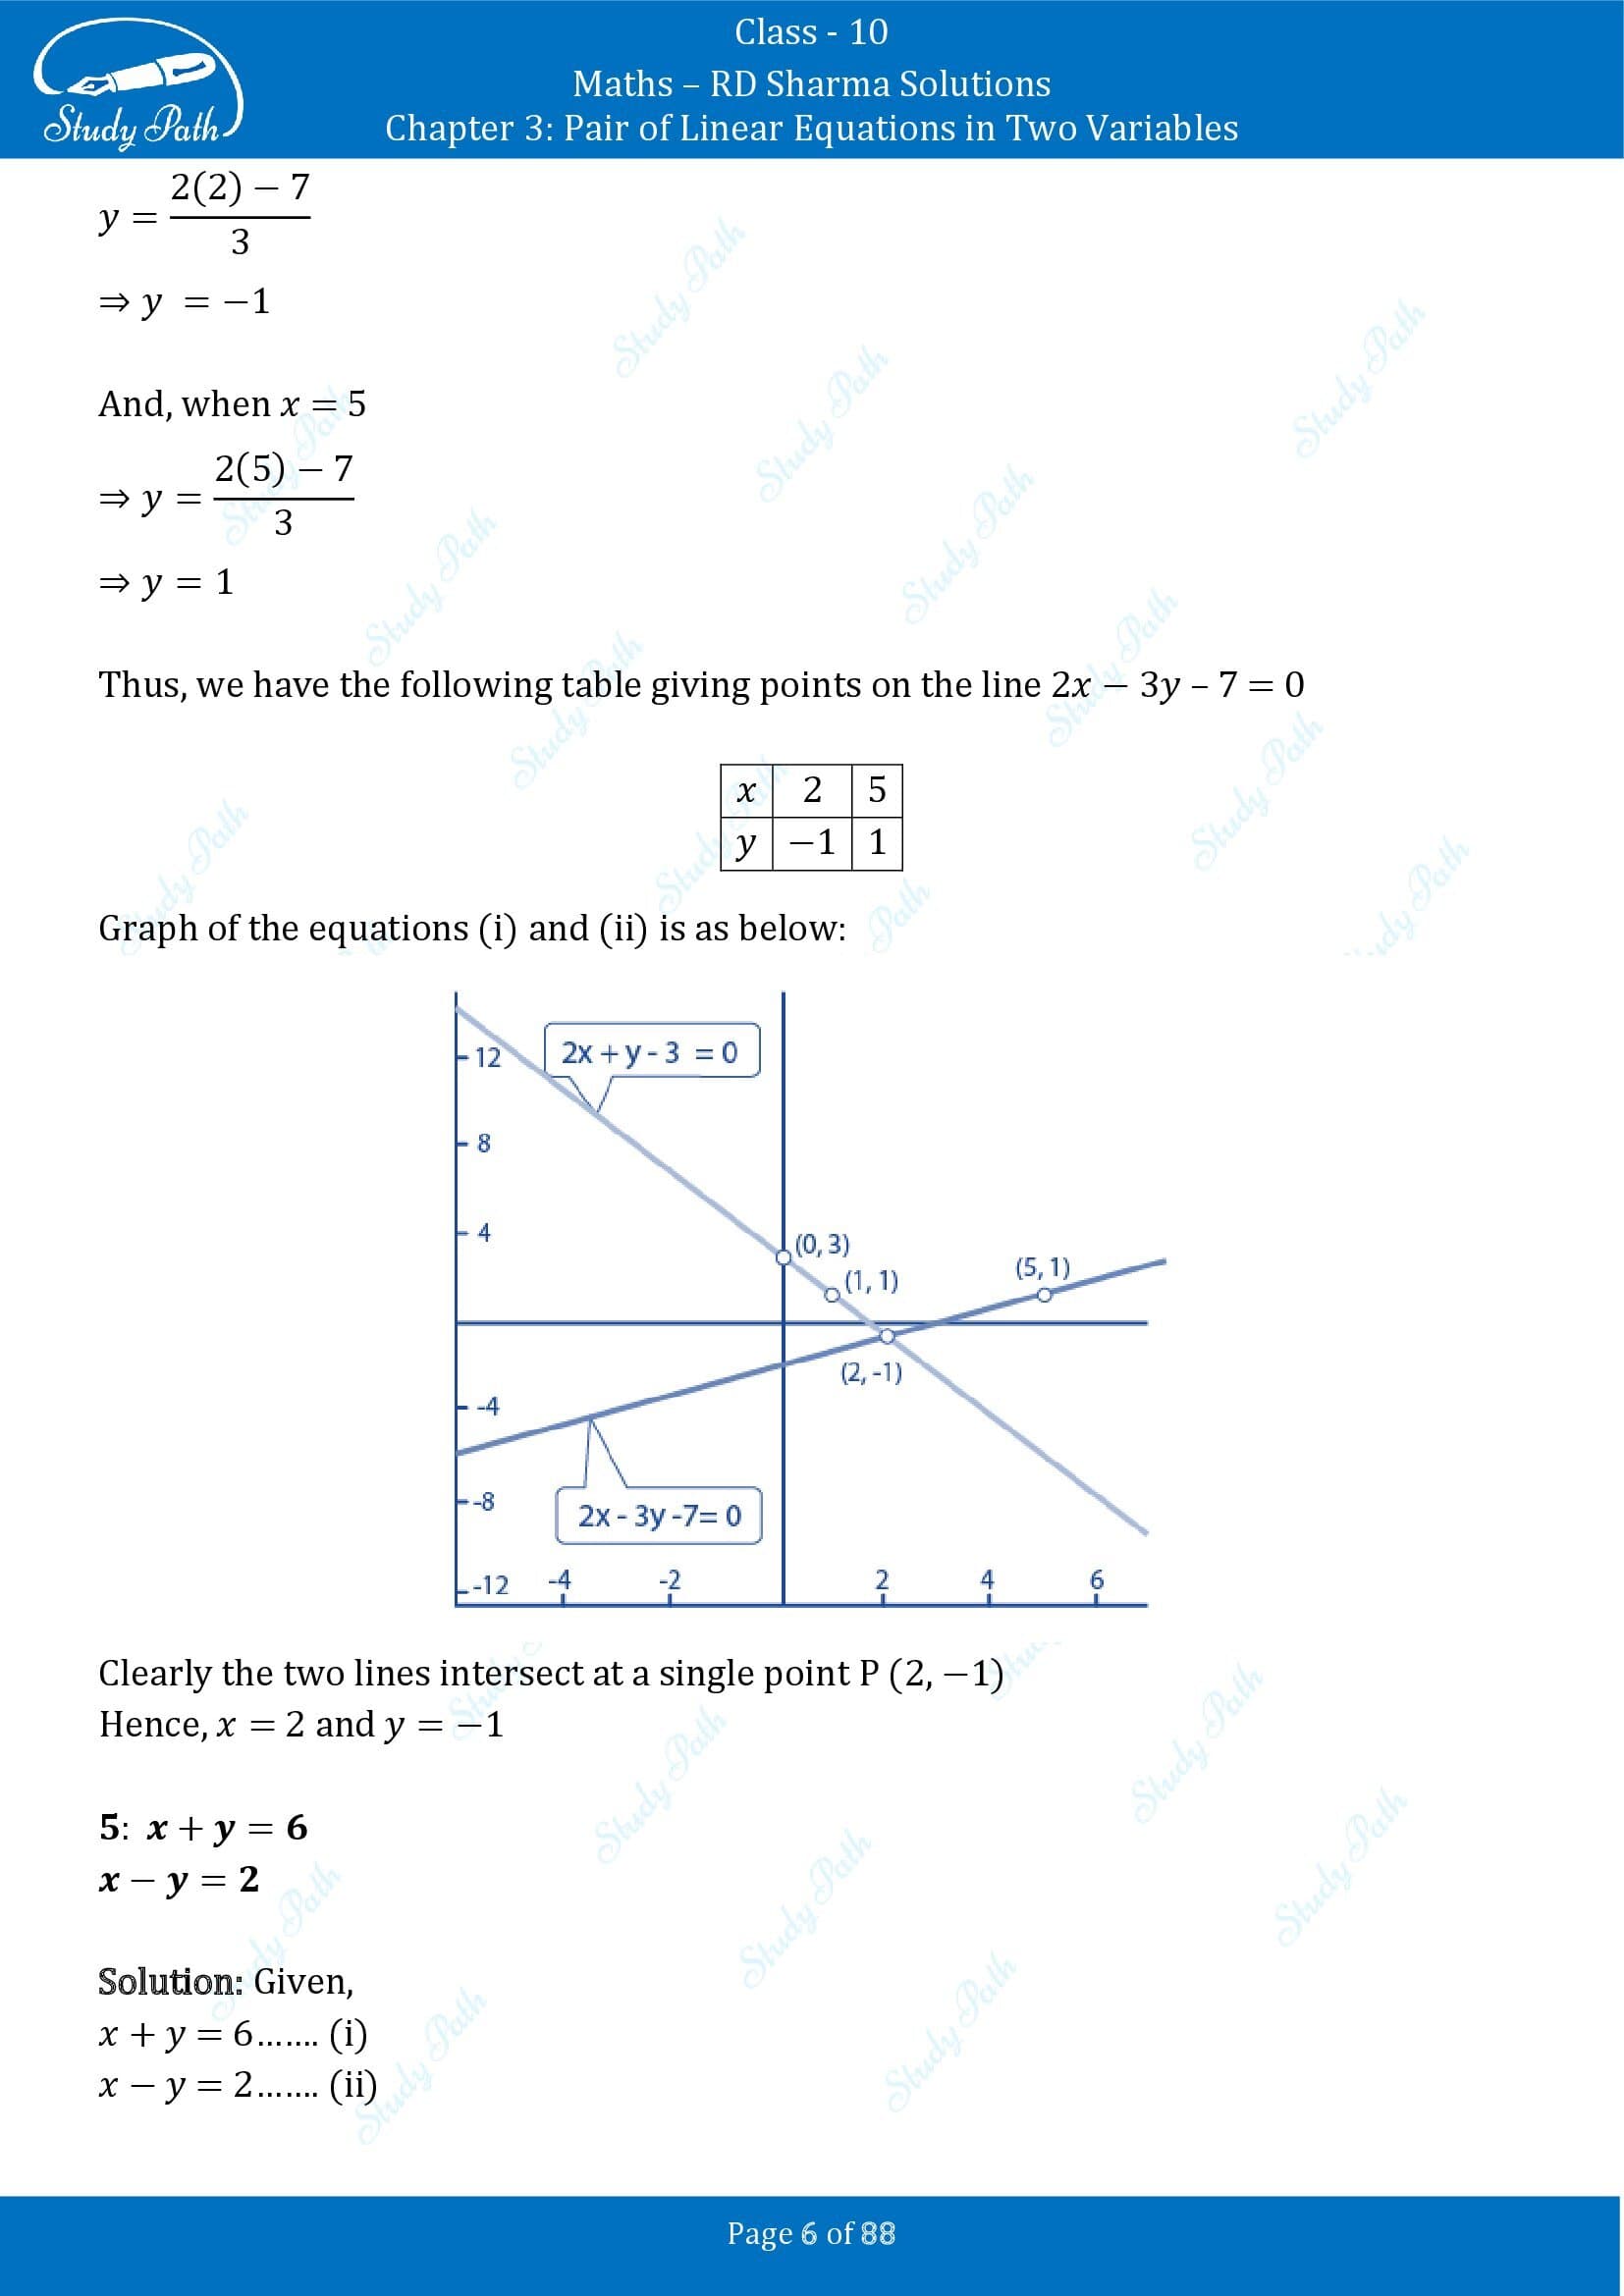 RD Sharma Solutions Class 10 Chapter 3 Pair of Linear Equations in Two Variables Exercise 3.2 00006